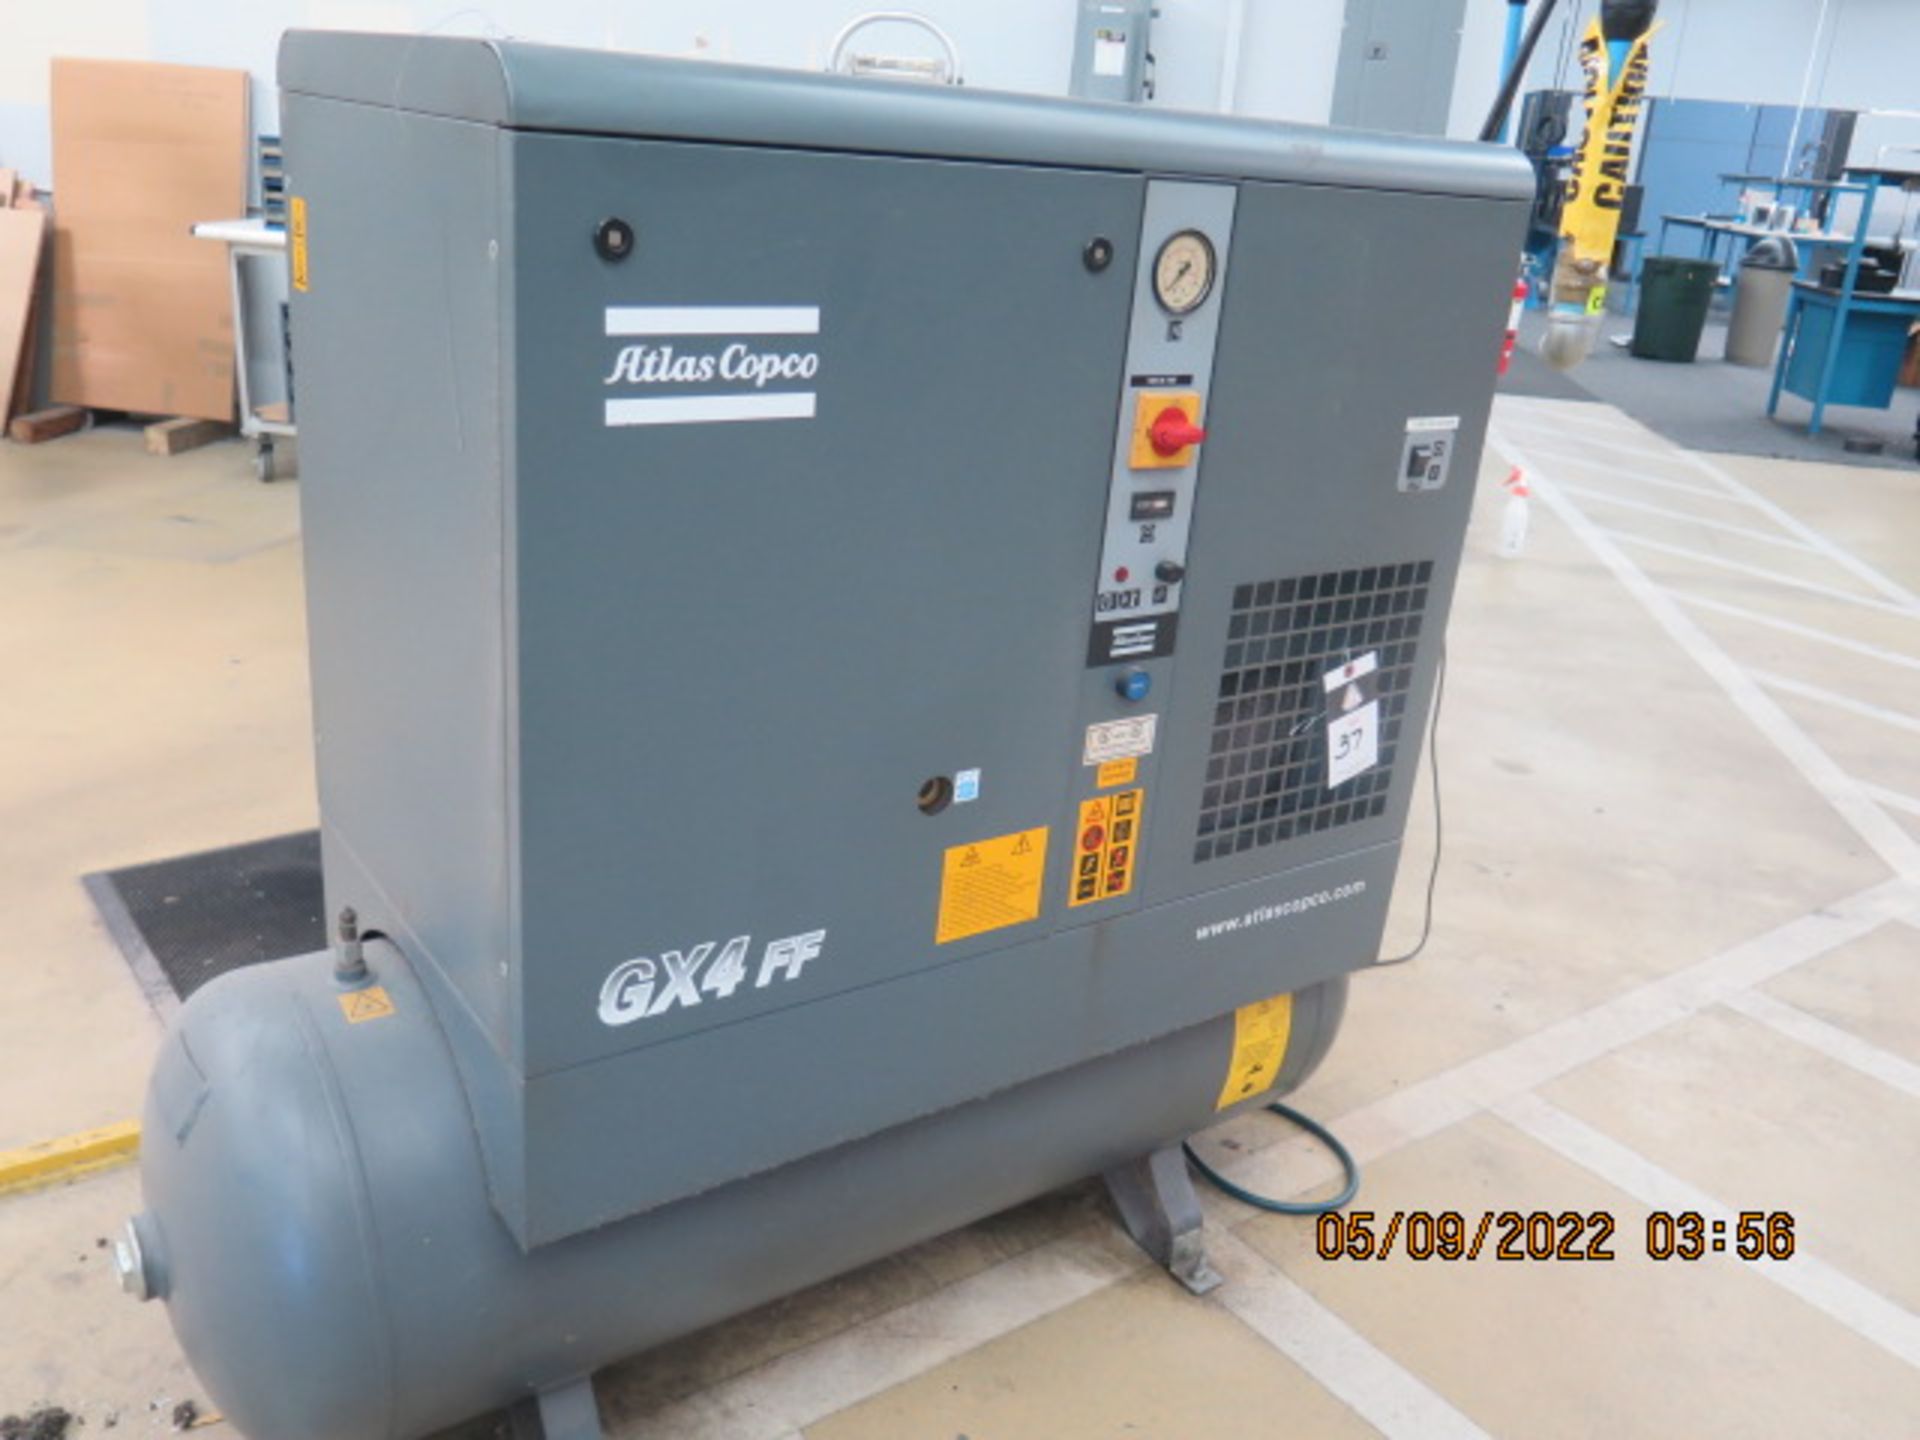 2004 Atlas Copco GX4 FF CSA/UL 5Hp Rotary Air Comp s/n AII643096 w/ Built-In Air Dryer, SOLD AS IS - Image 2 of 9